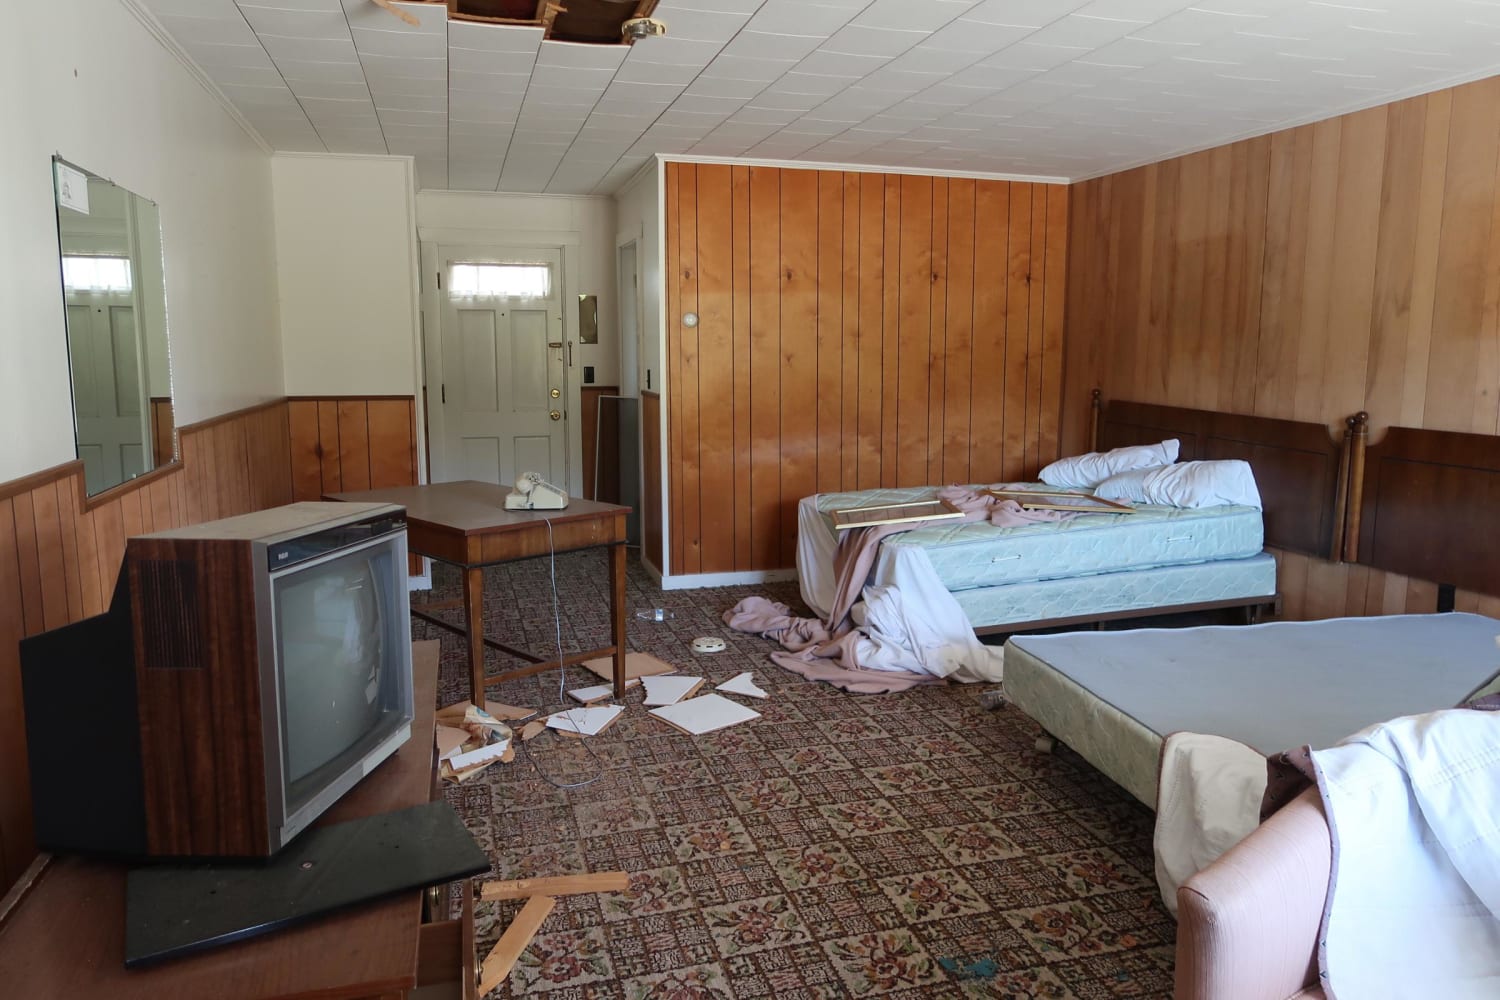 A room at an abandoned hotel in the White Mountains